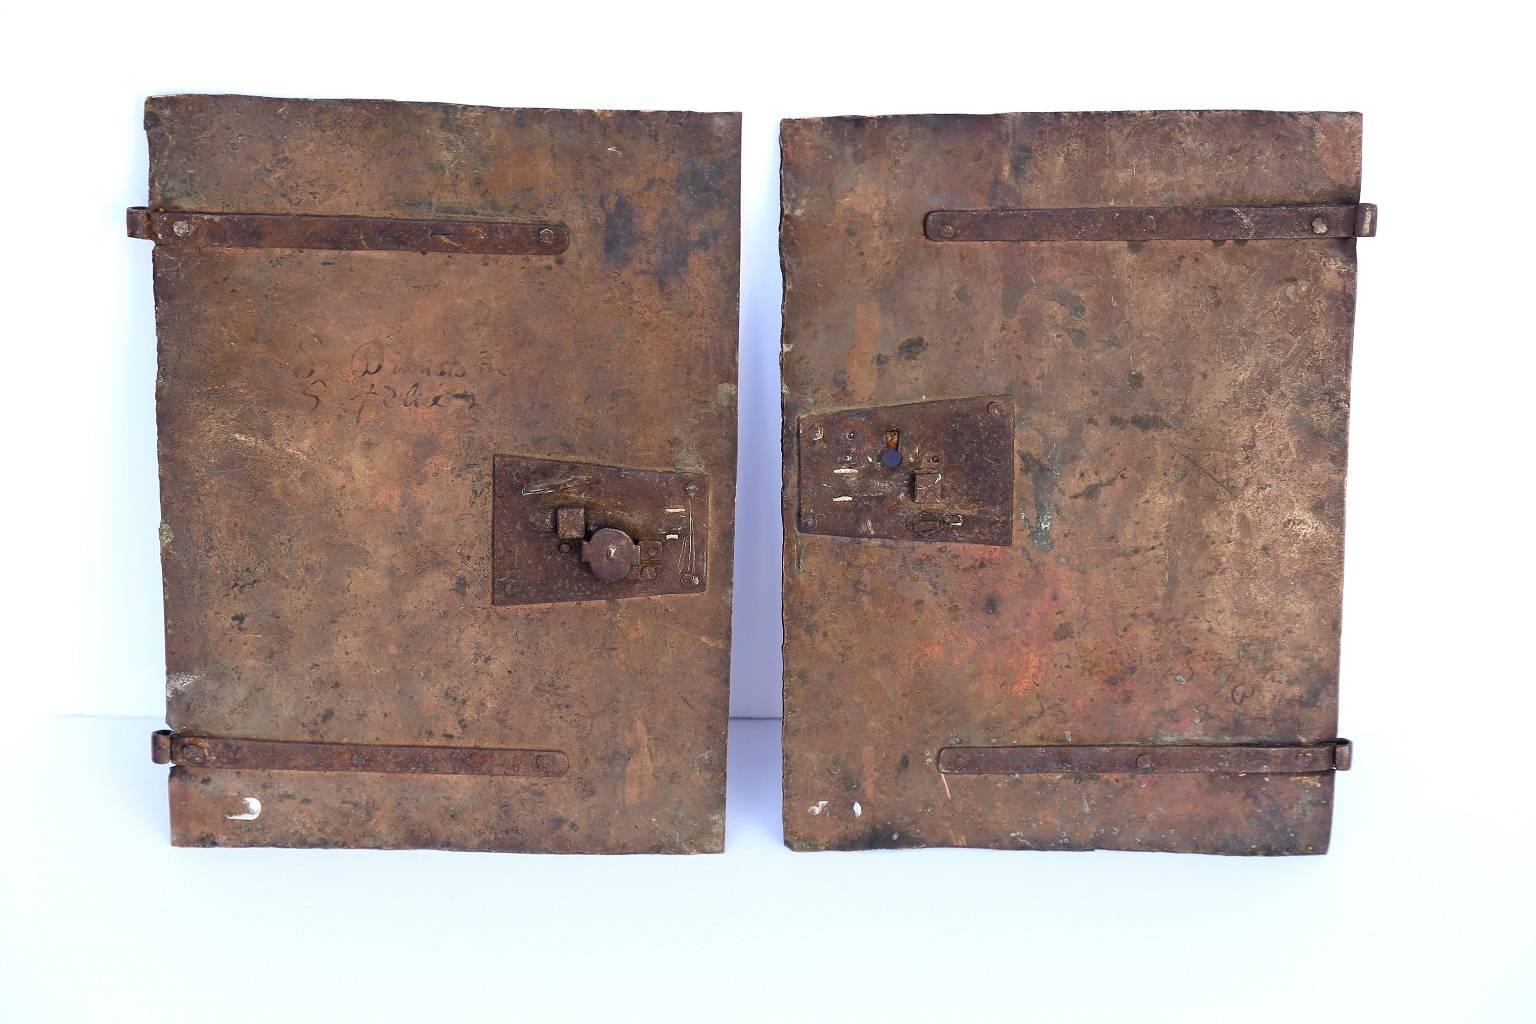 Pair of early oil on copper paintings featuring scenes displaying saints, (circa 1680-1700). Copper panels originally served as tabernacle doors. Continental European in origin, probably Italian, with writing on reverse. Sold together as a pair